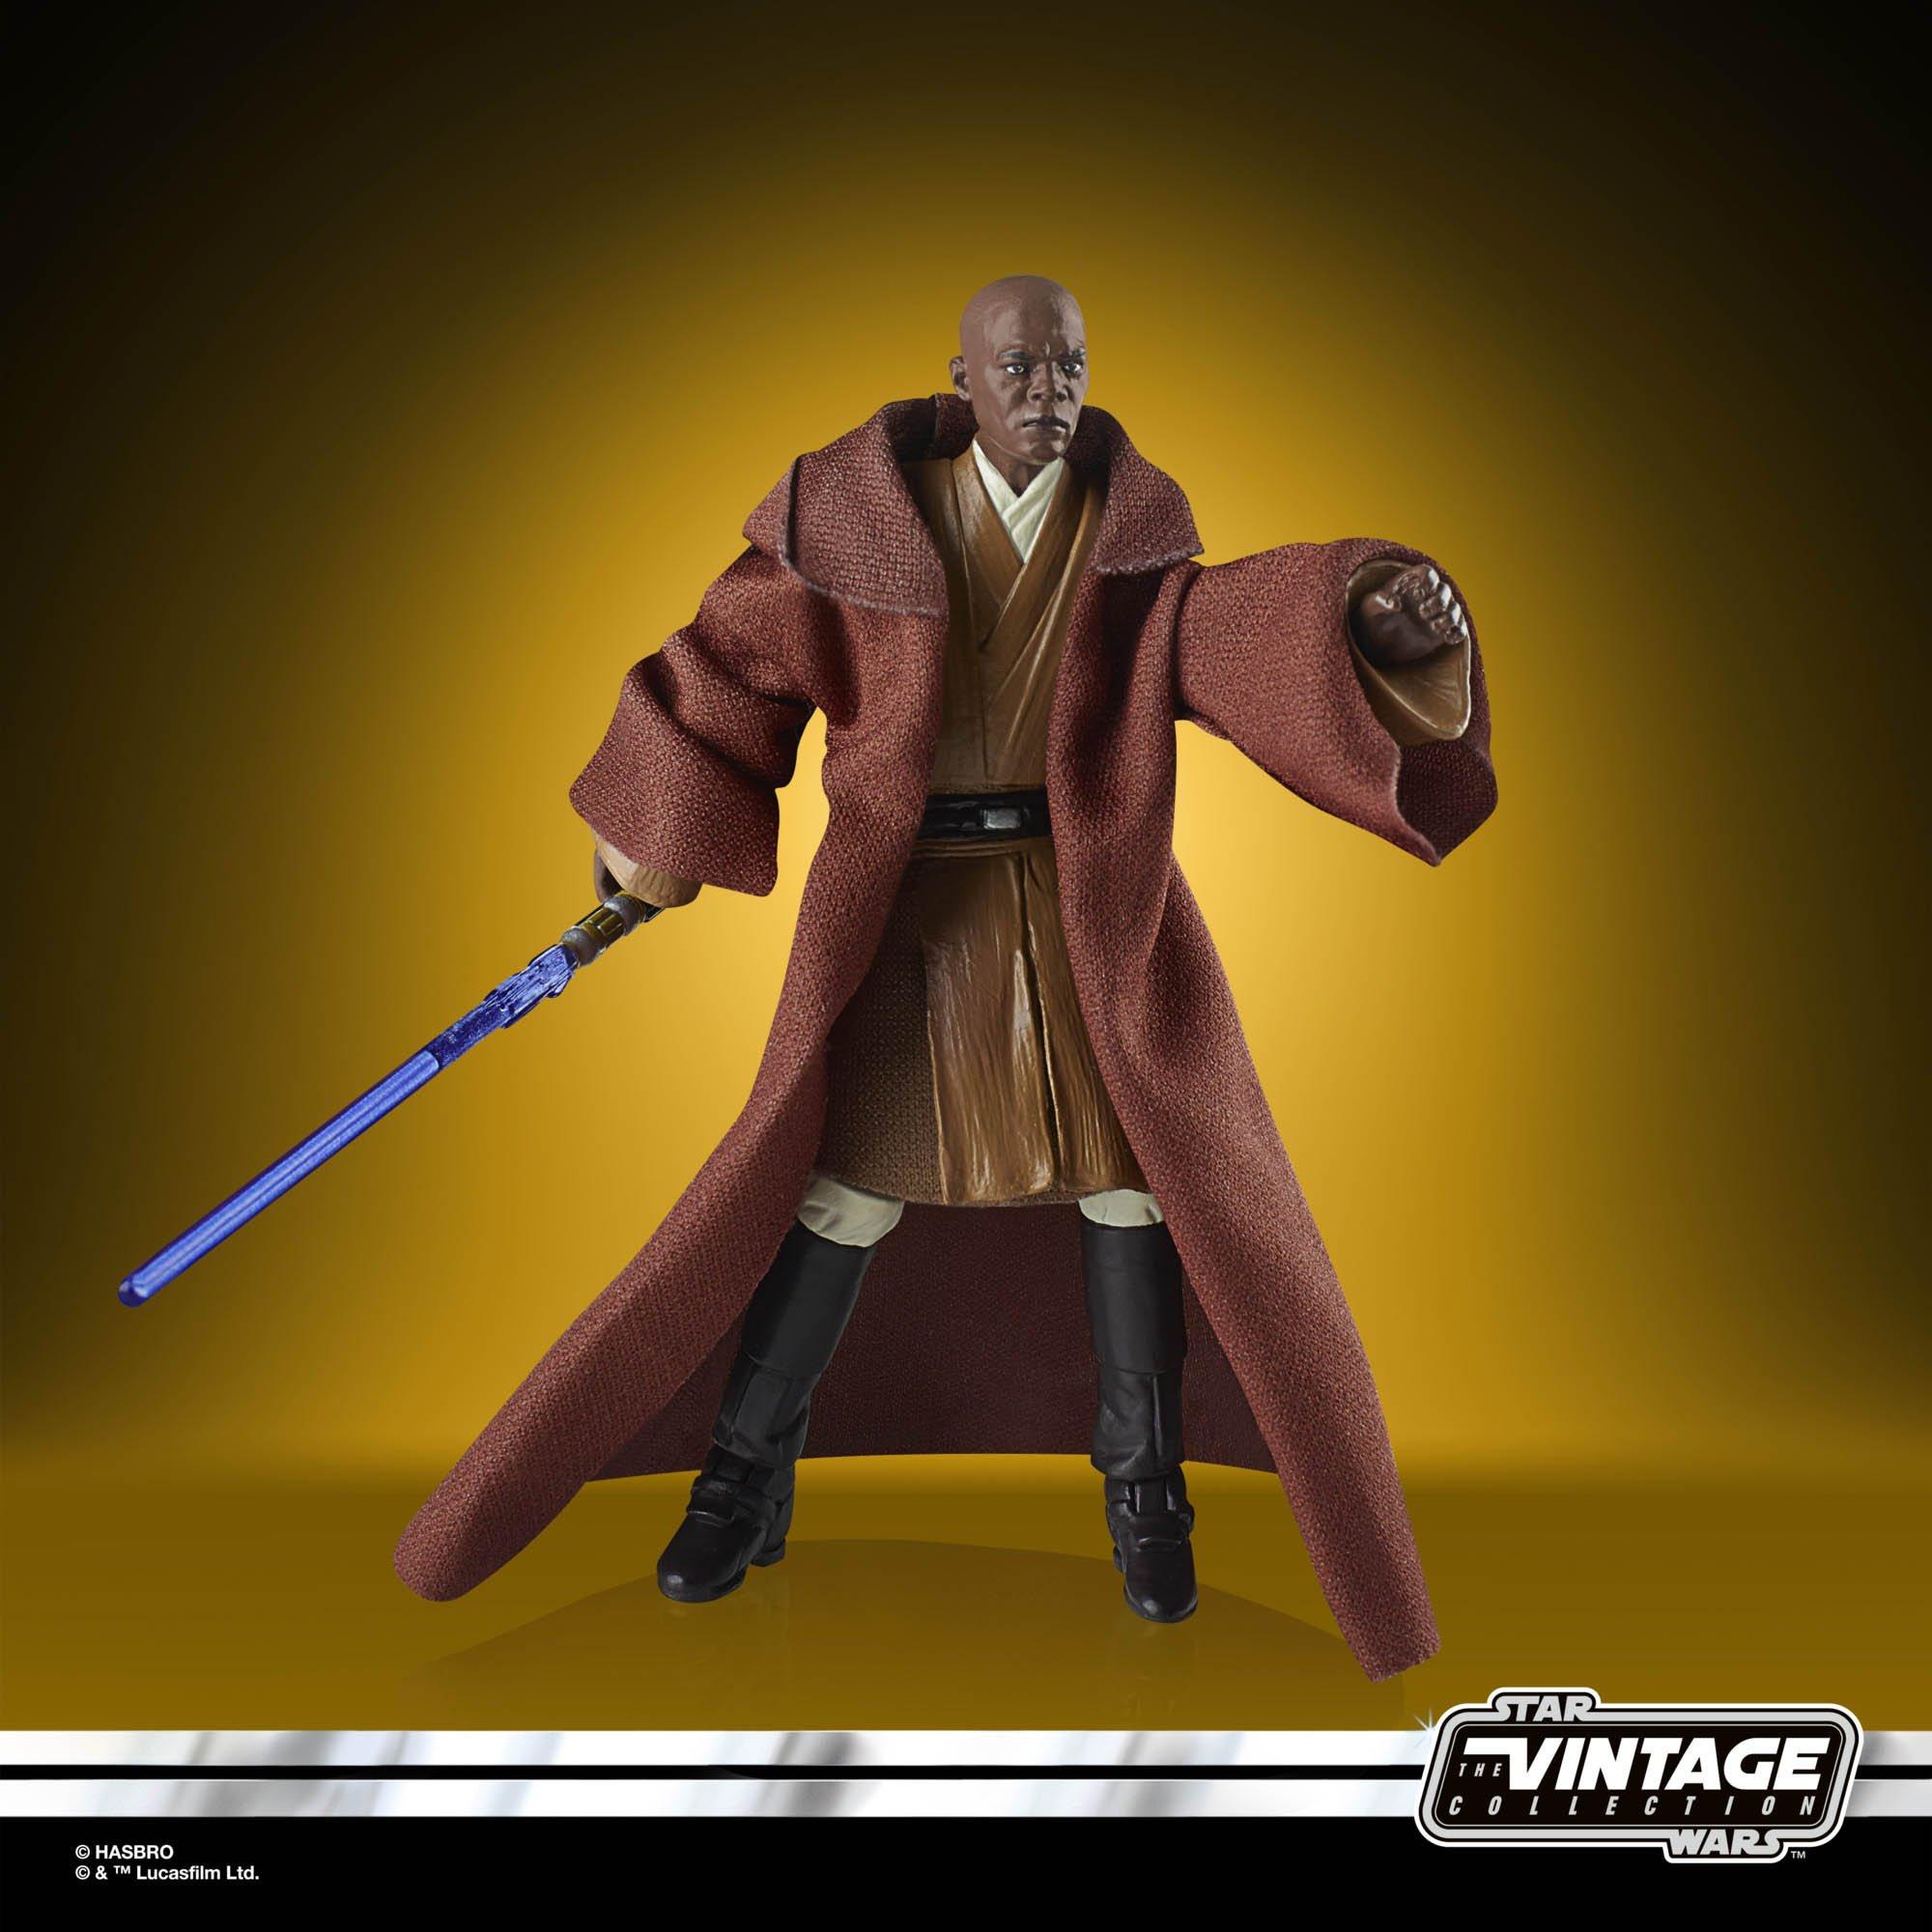 Hasbro Star Wars The Vintage Collection Star Wars: Attack of the Clones Mace Windu 3.75-in Action Figure